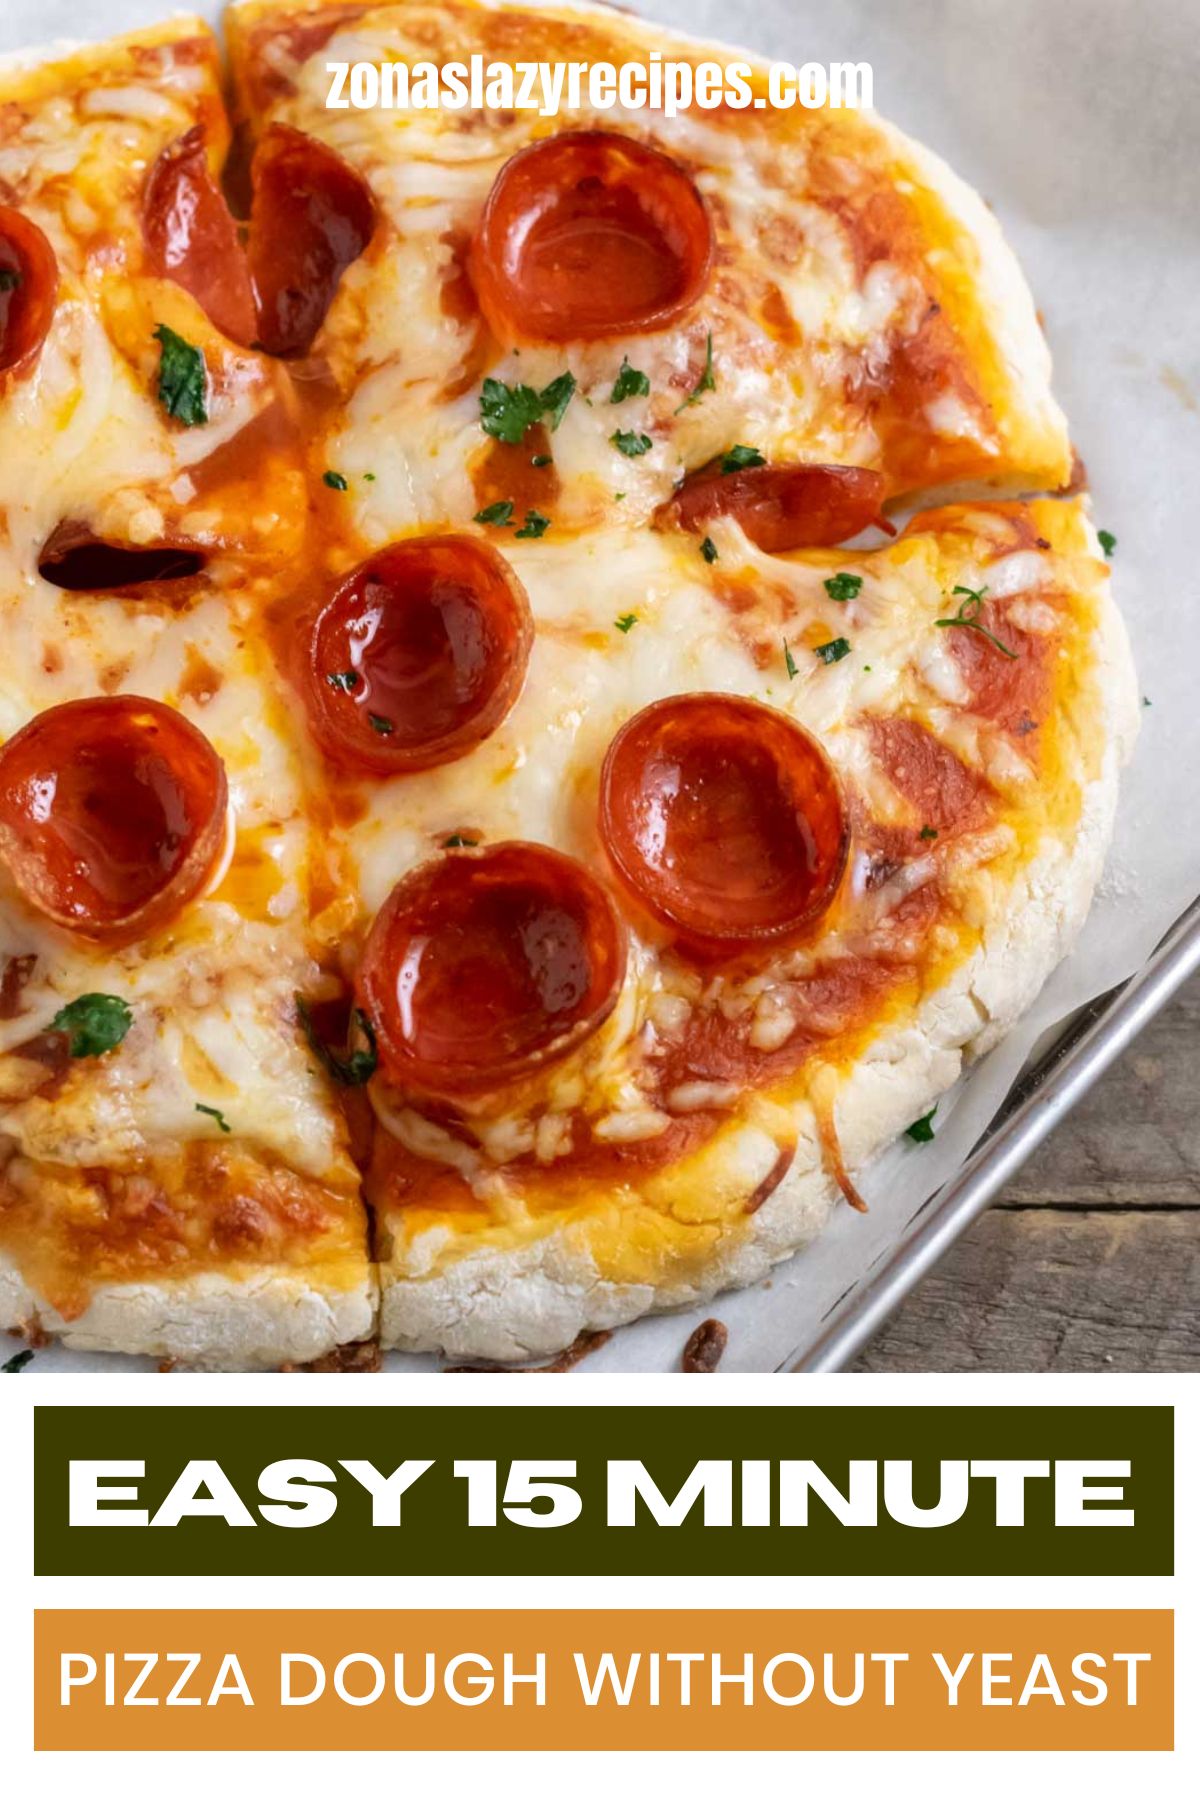 6 Ingredient Pizza Dough without Yeast (15 min) - Zona's Lazy Recipes